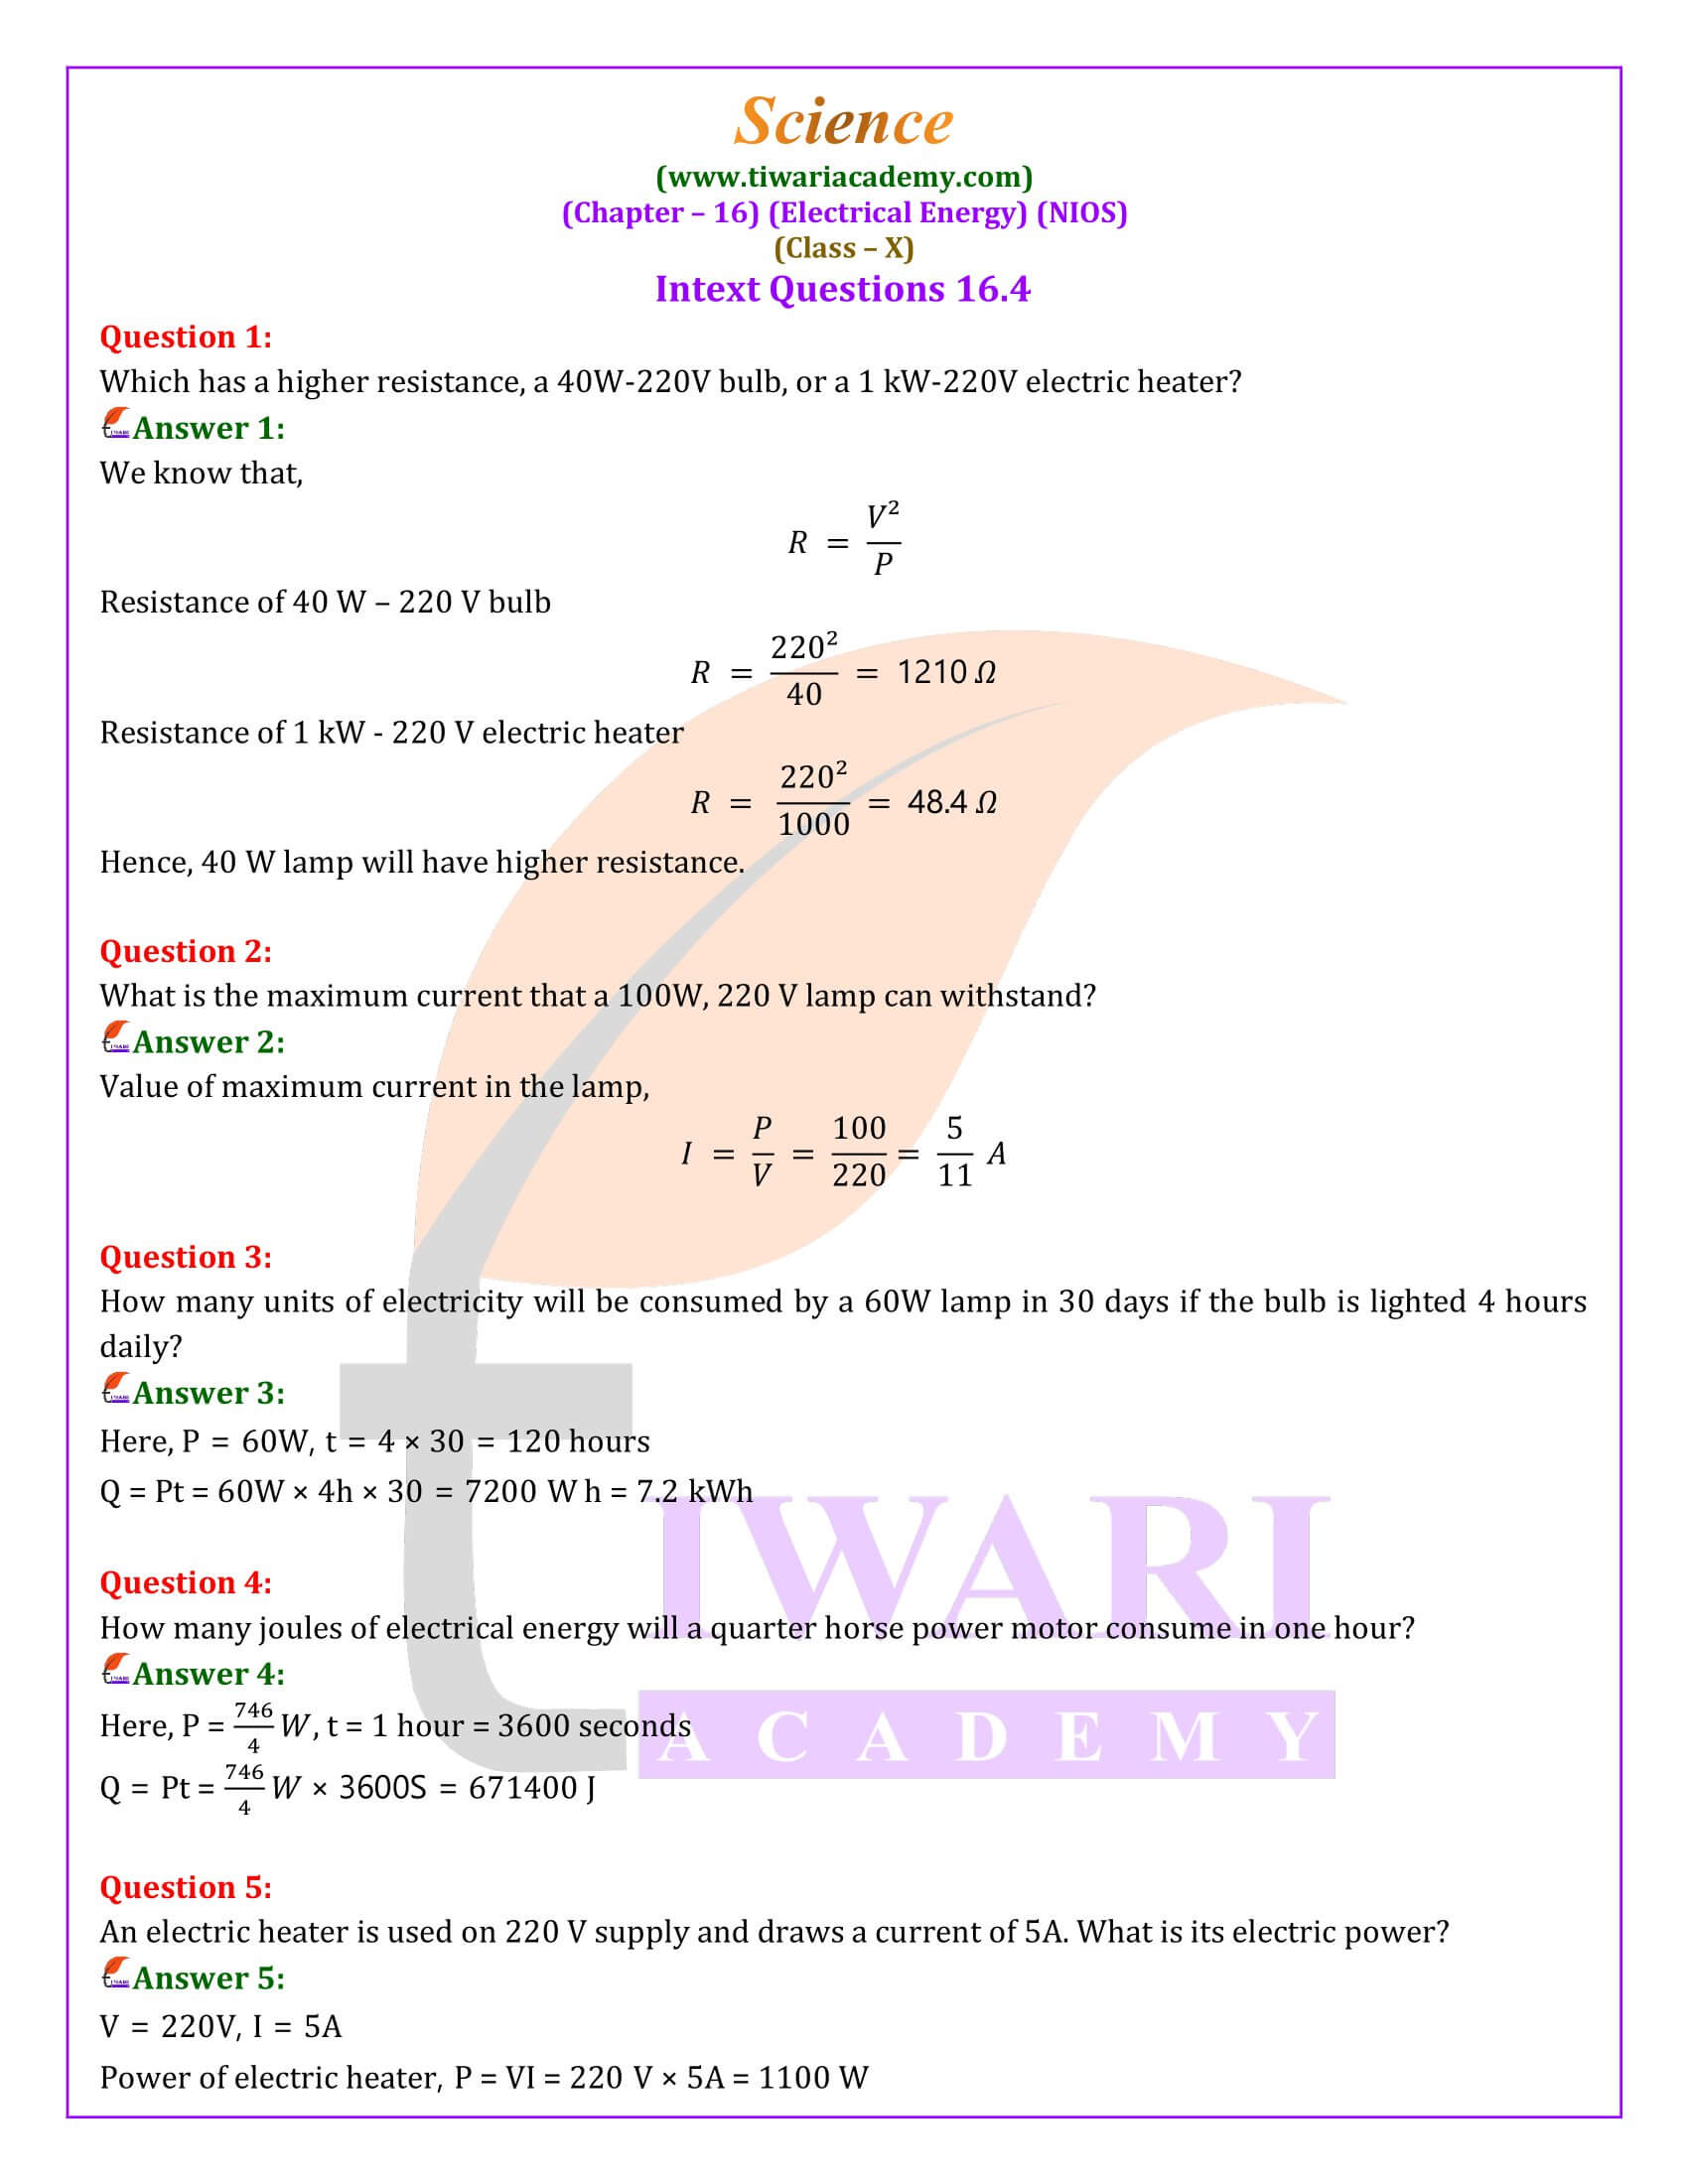 NIOS Class 10 Science Chapter 16 Answers